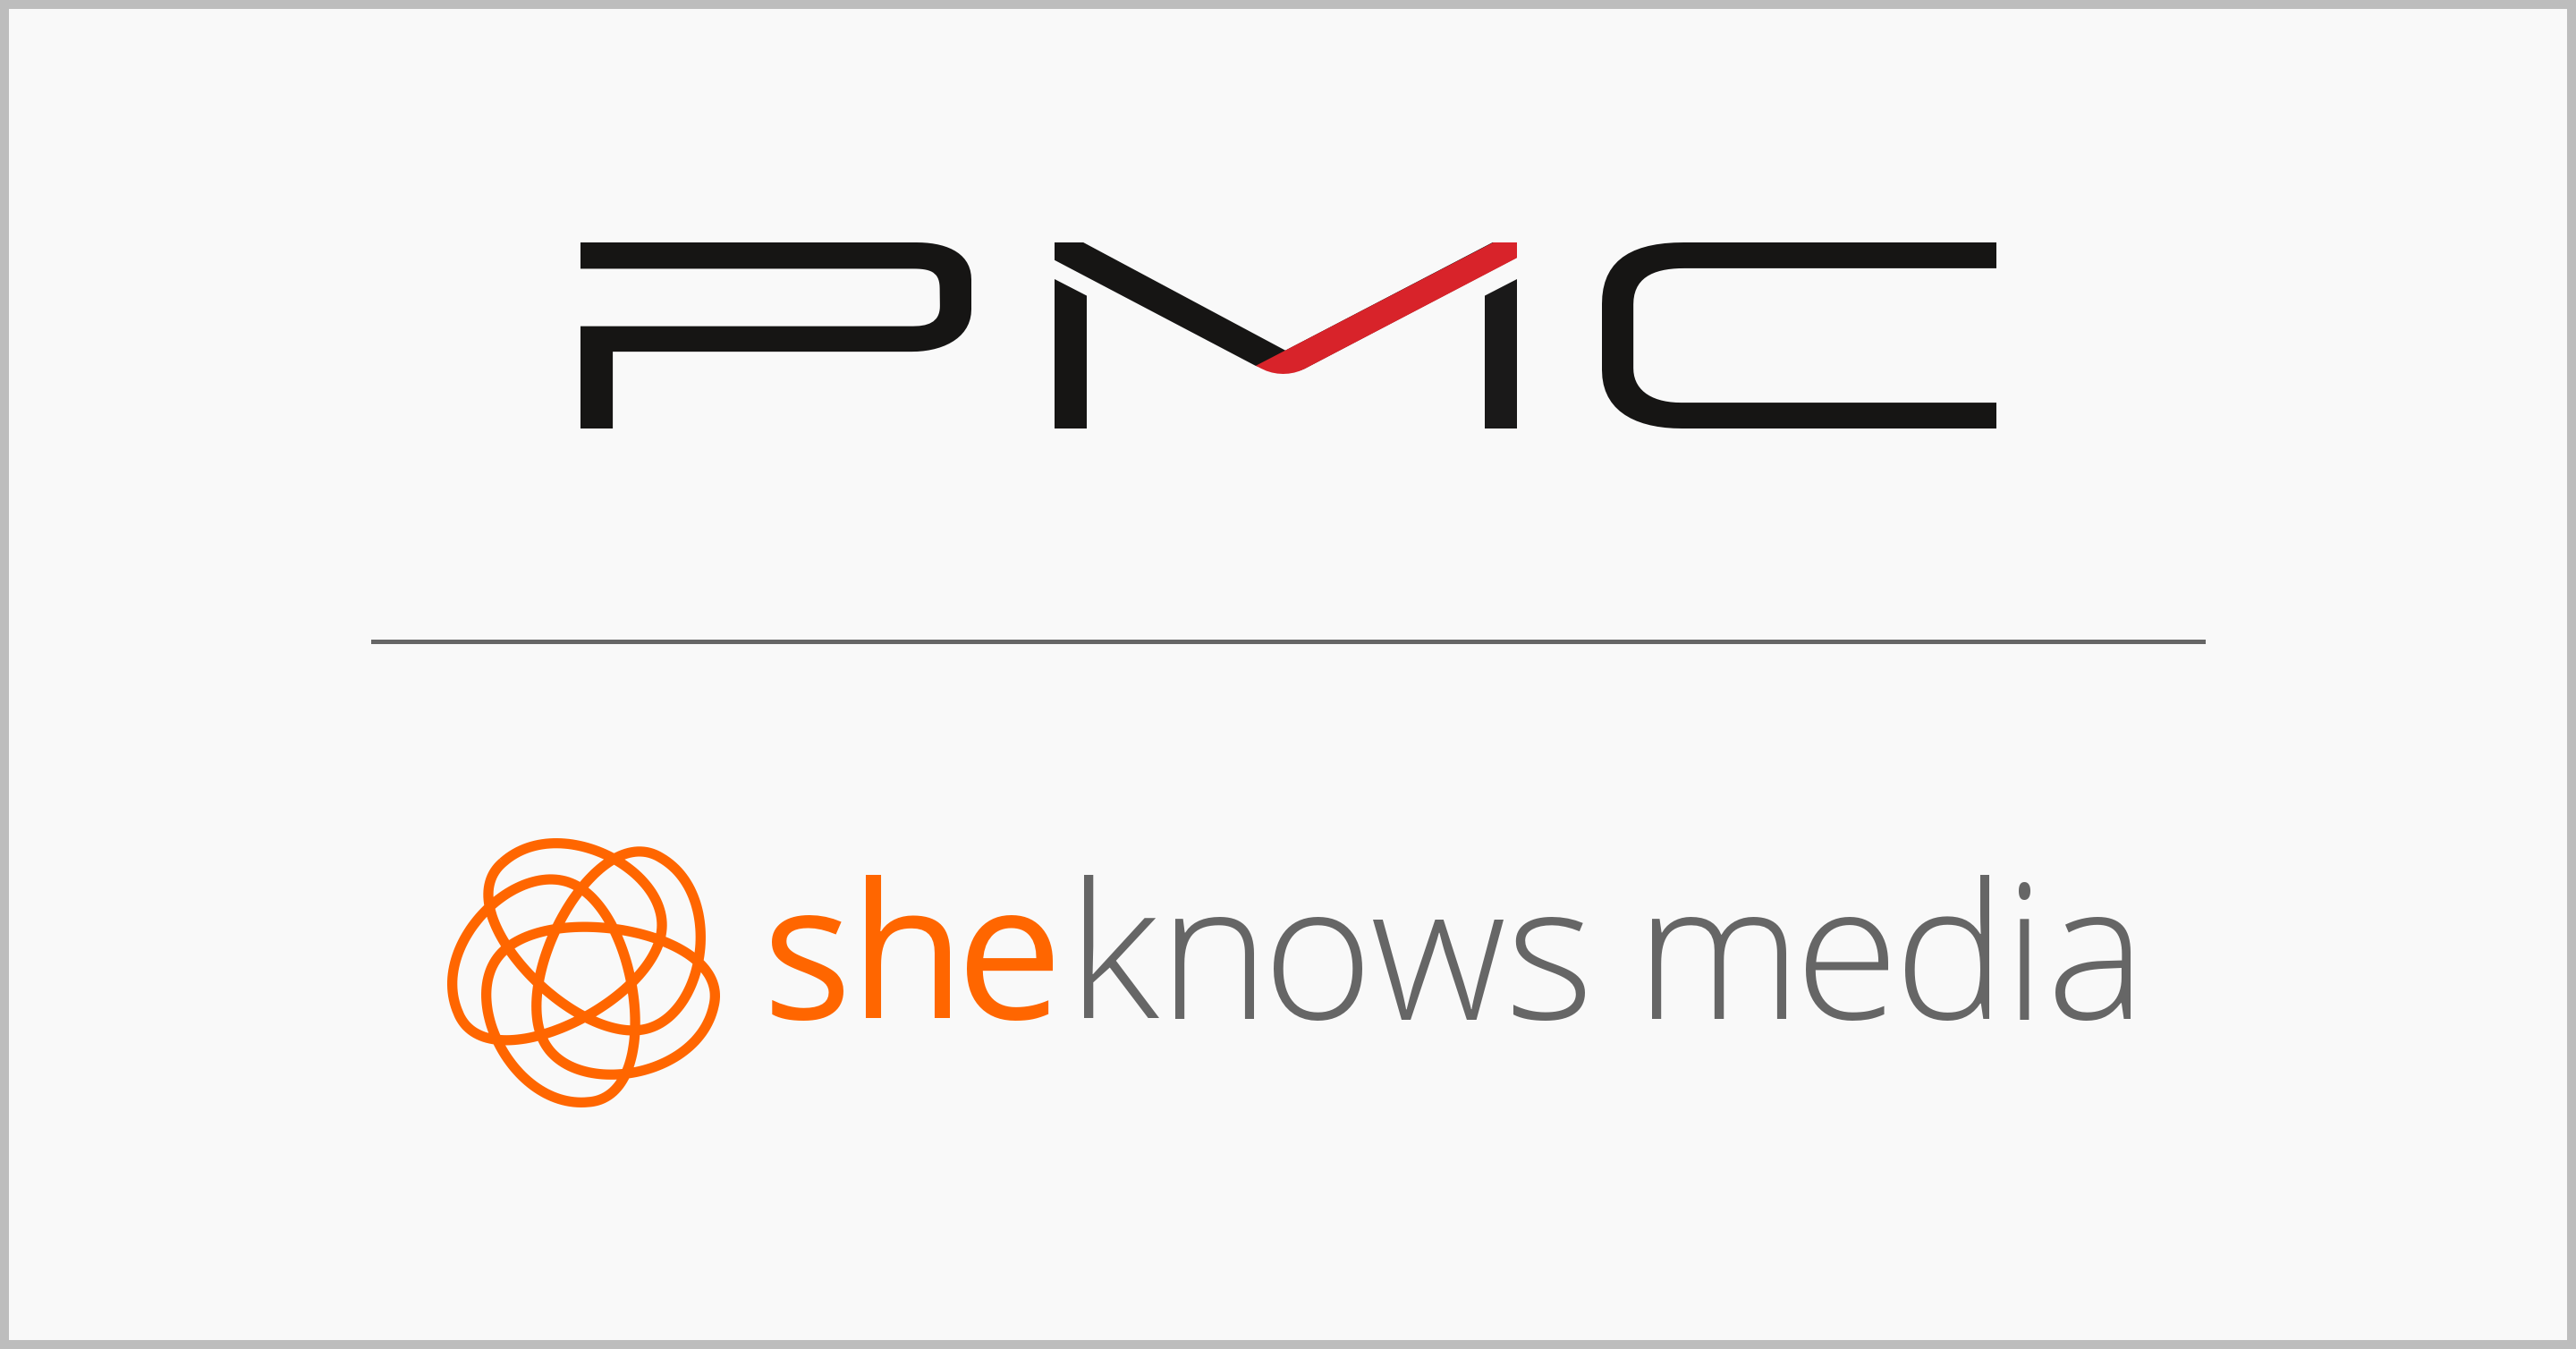 PMC_sheknows_media_relaunch